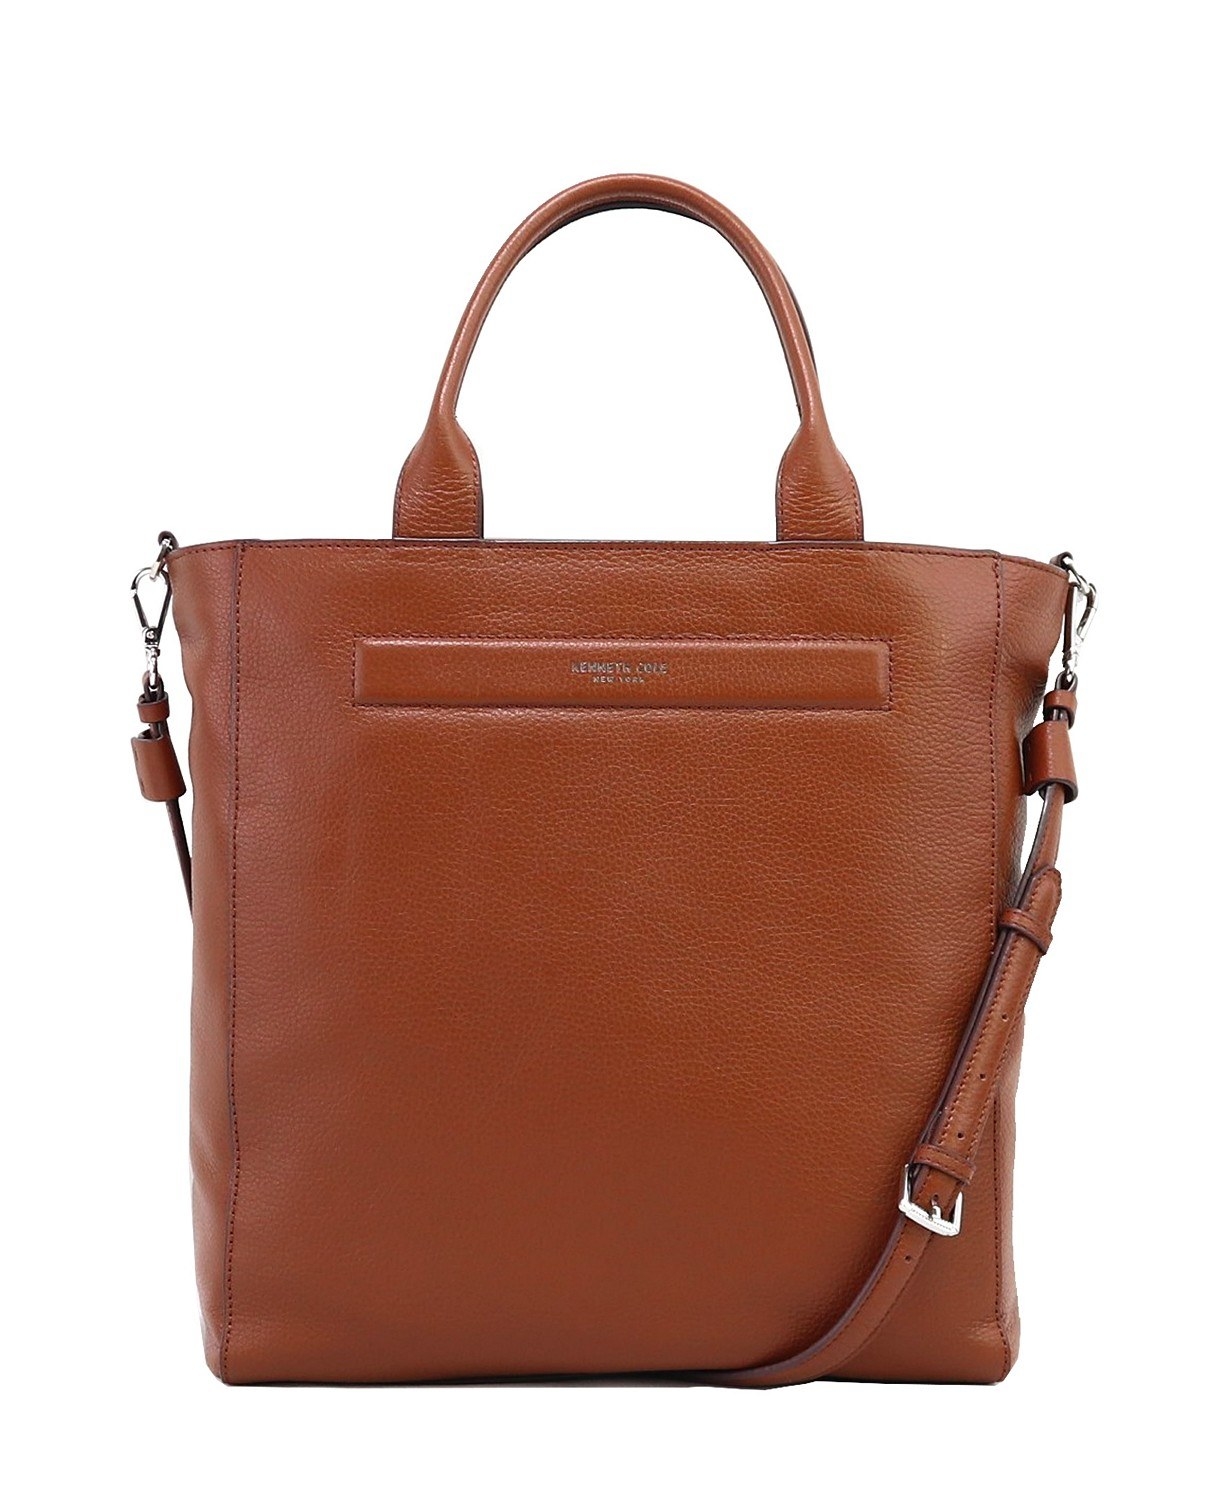 A brown leather tote bag with handles and adjustable shoulder strap 